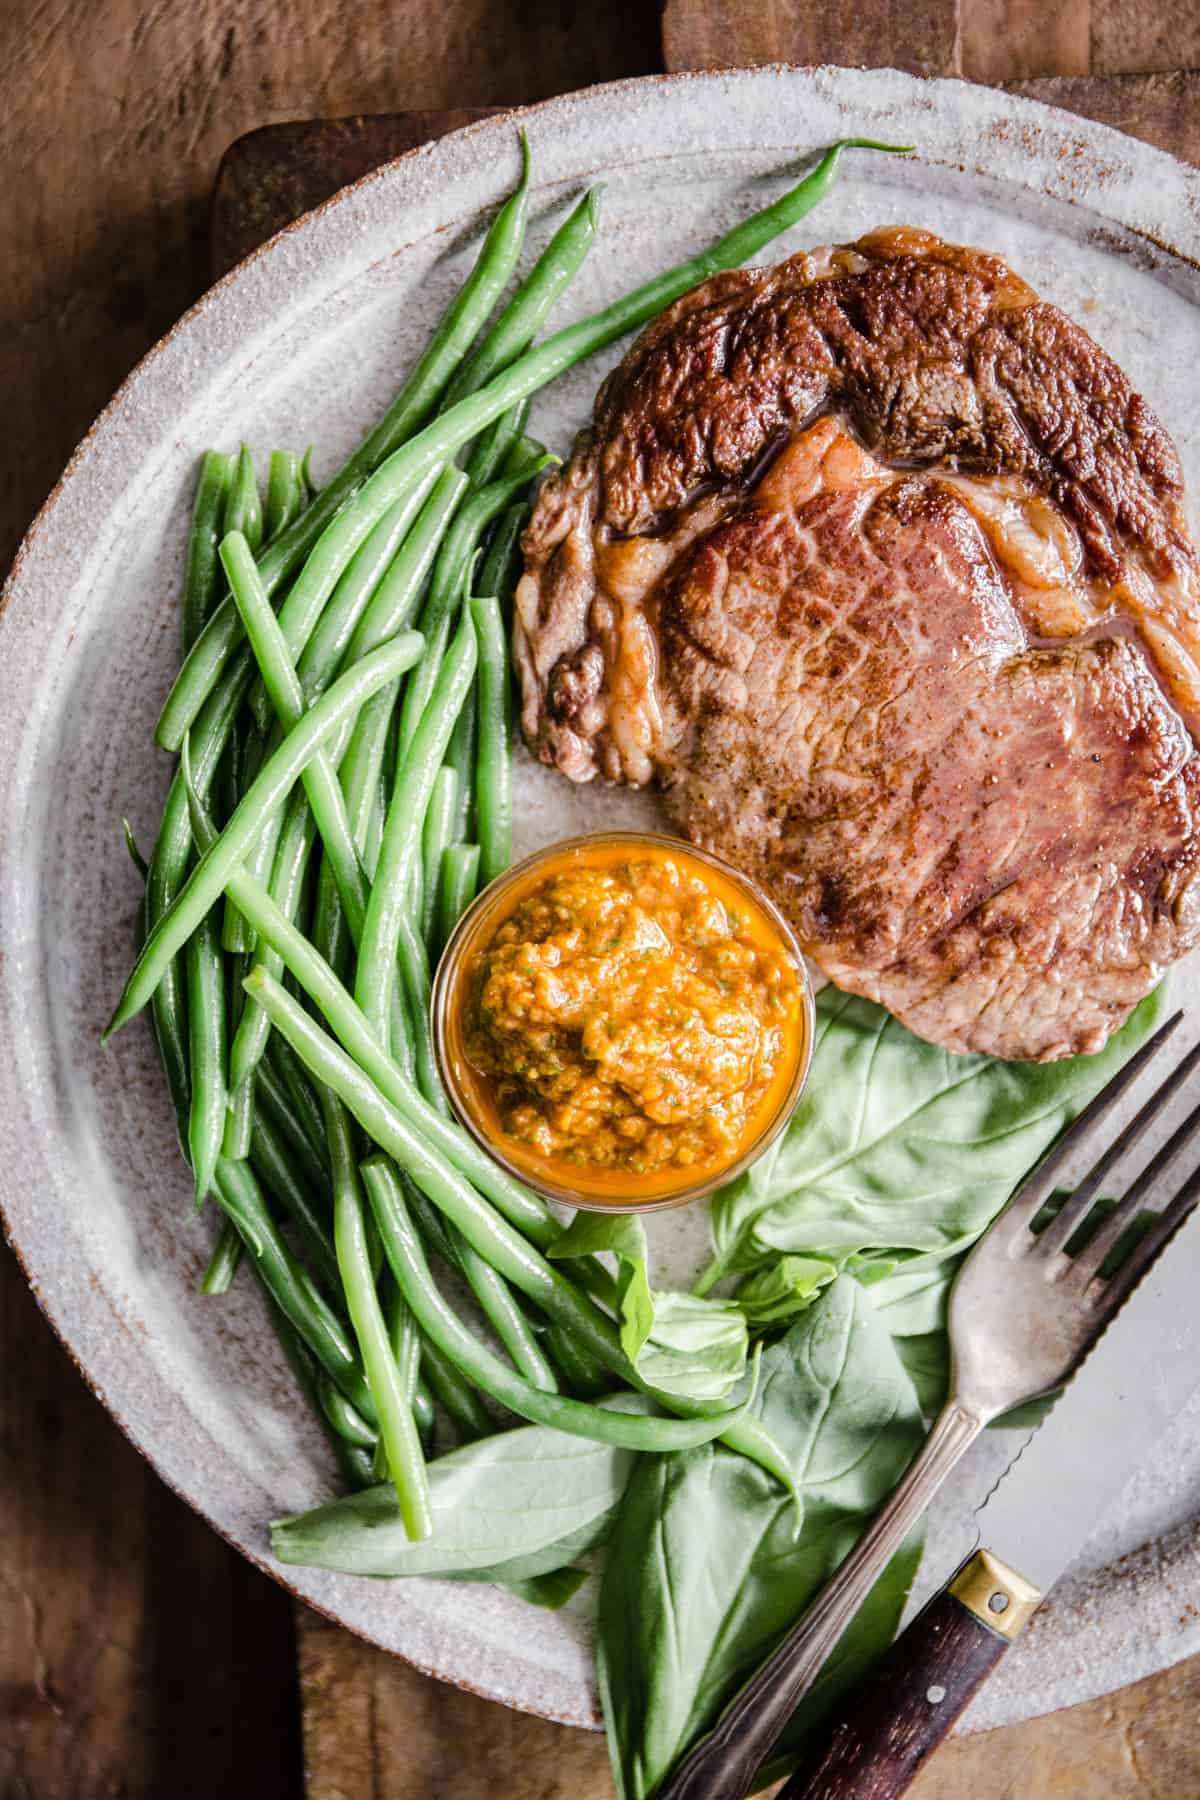 Steak with green beans and sun-dried tomato sauce on a white plate